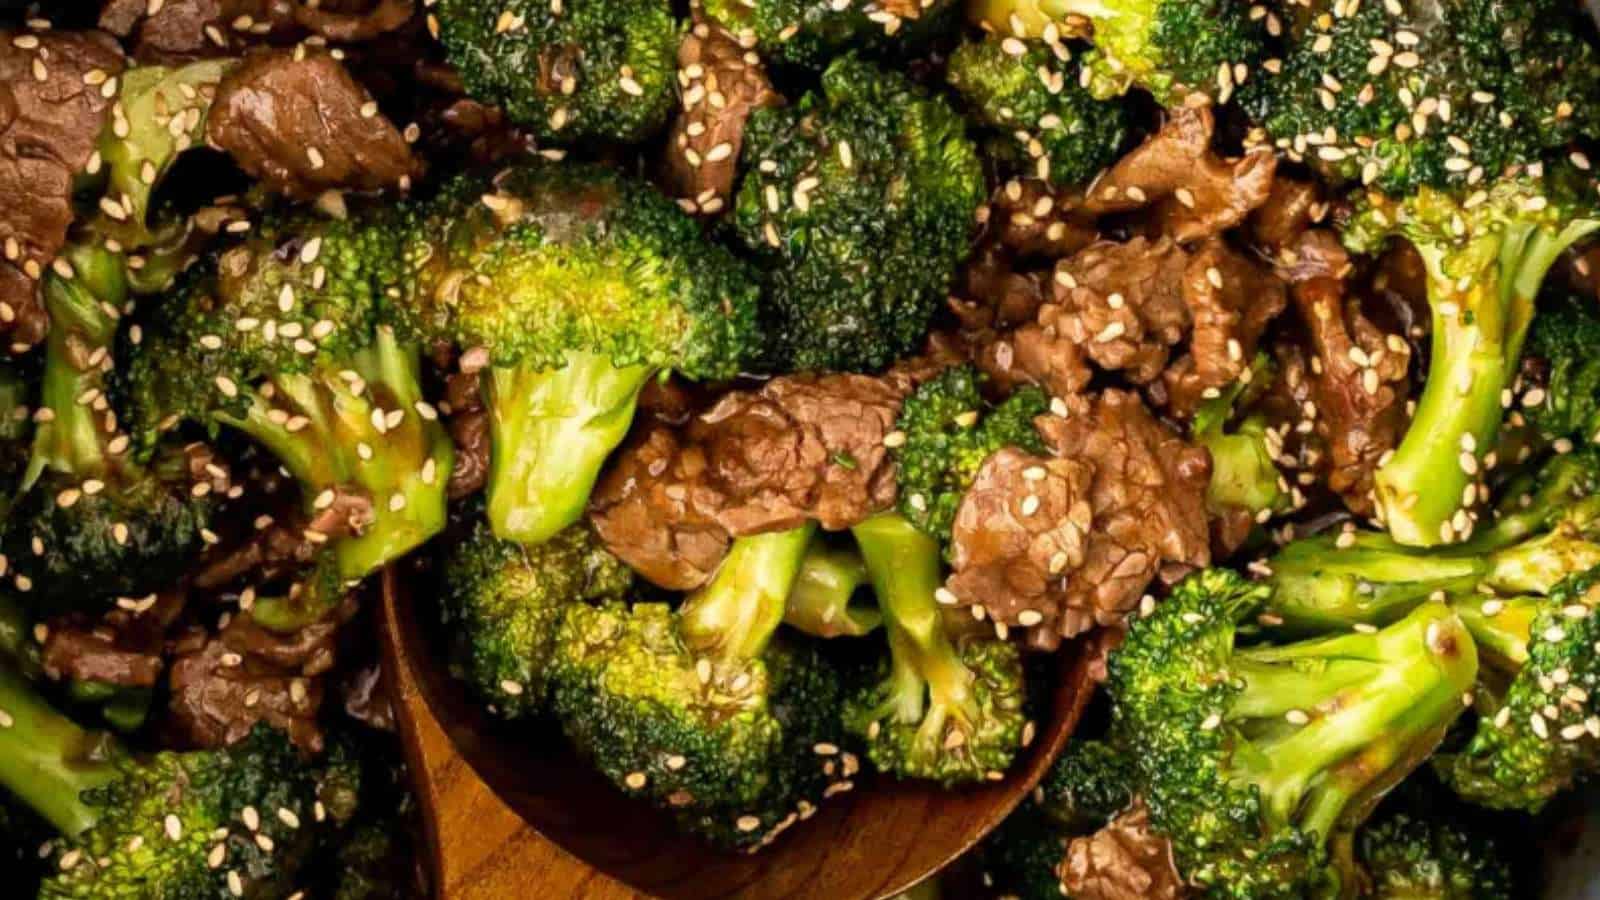 Stir fried broccoli with beef and sesame seeds.